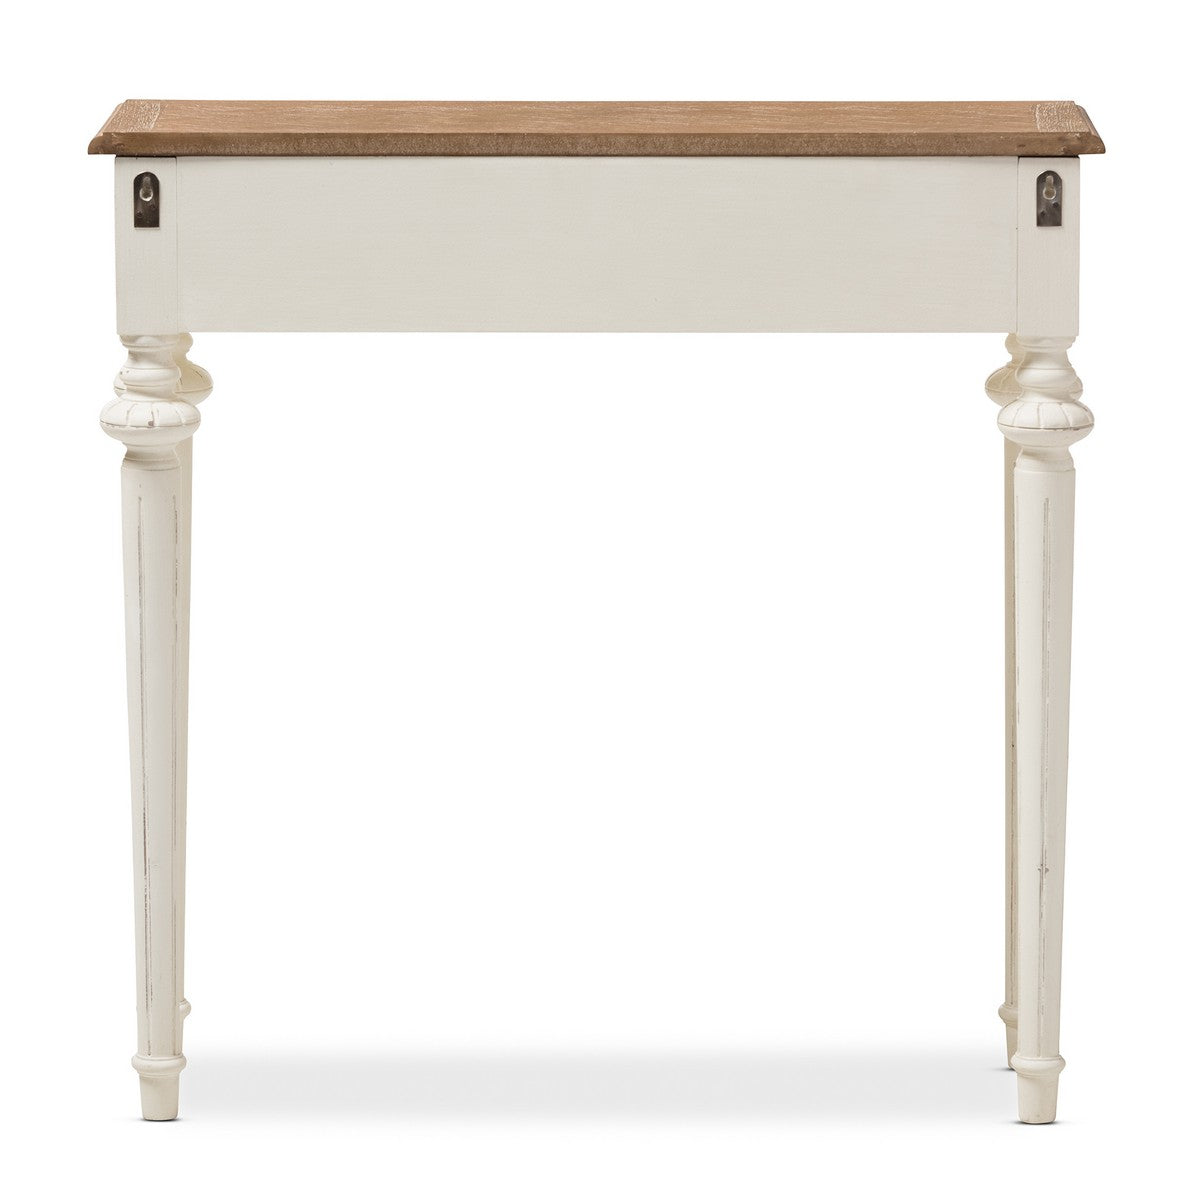 Baxton Studio Marquetterie French Provincial Style Weathered Oak and White Wash Distressed Finish Wood Two-Tone Console Table